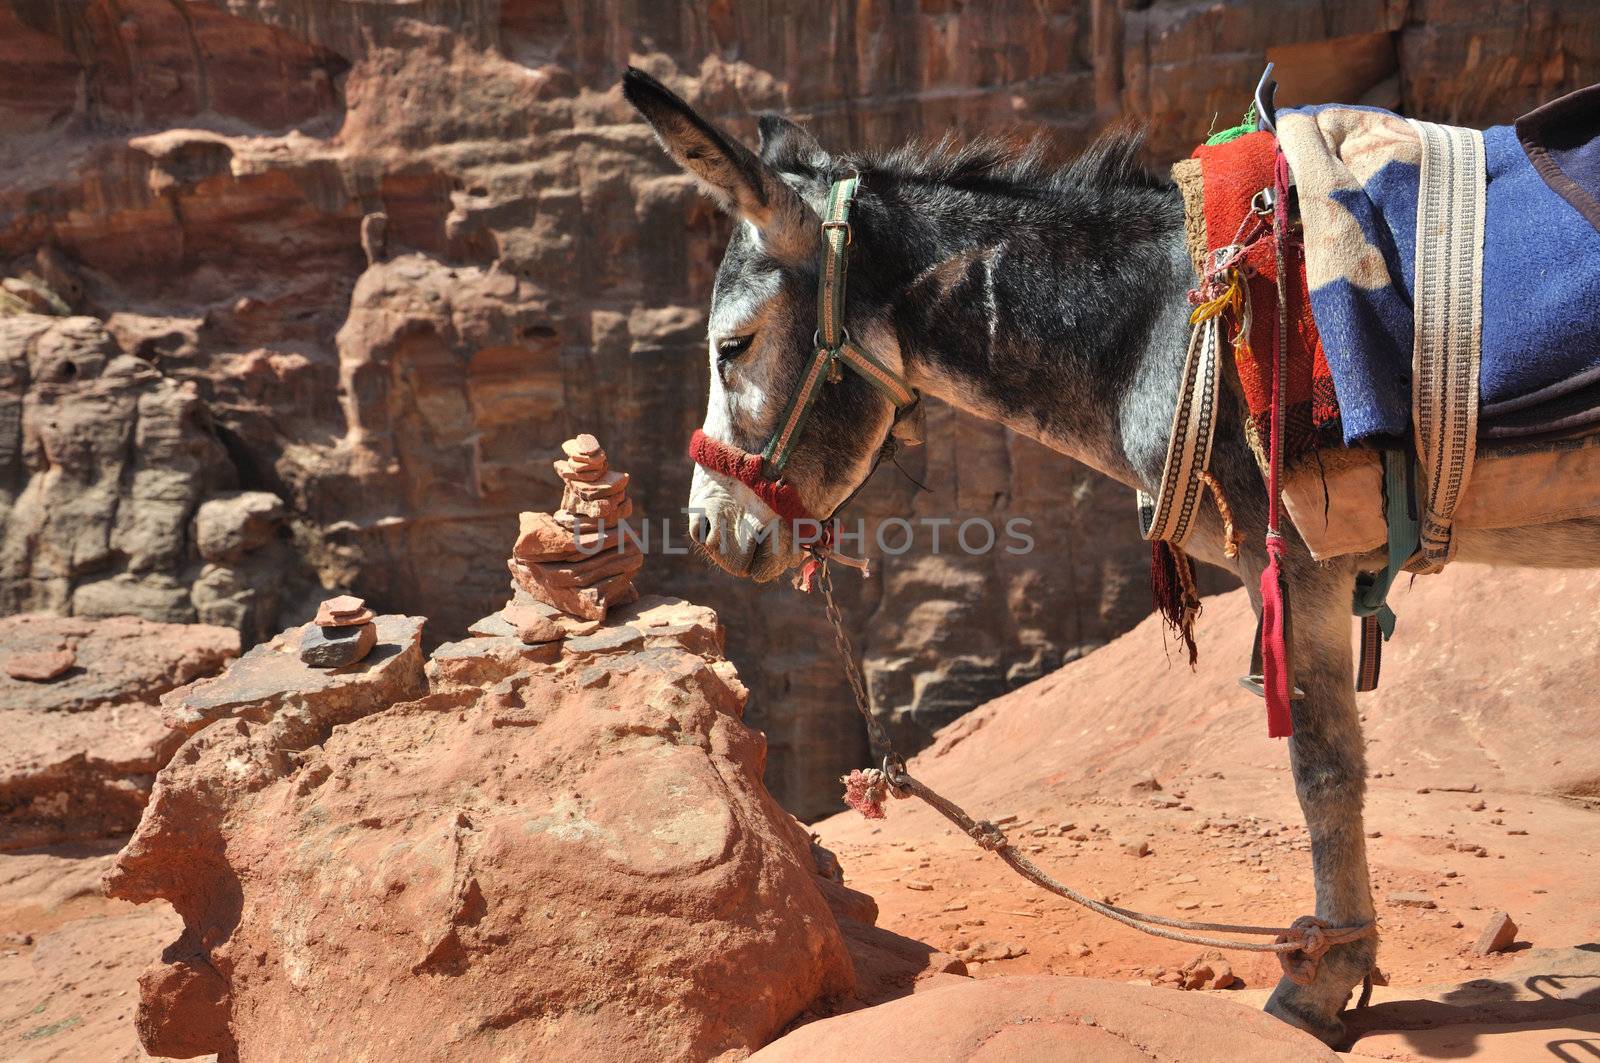 In the world are many places where you need another trasport than car - donkey. This is in archelogical site at Petra in Jordan.